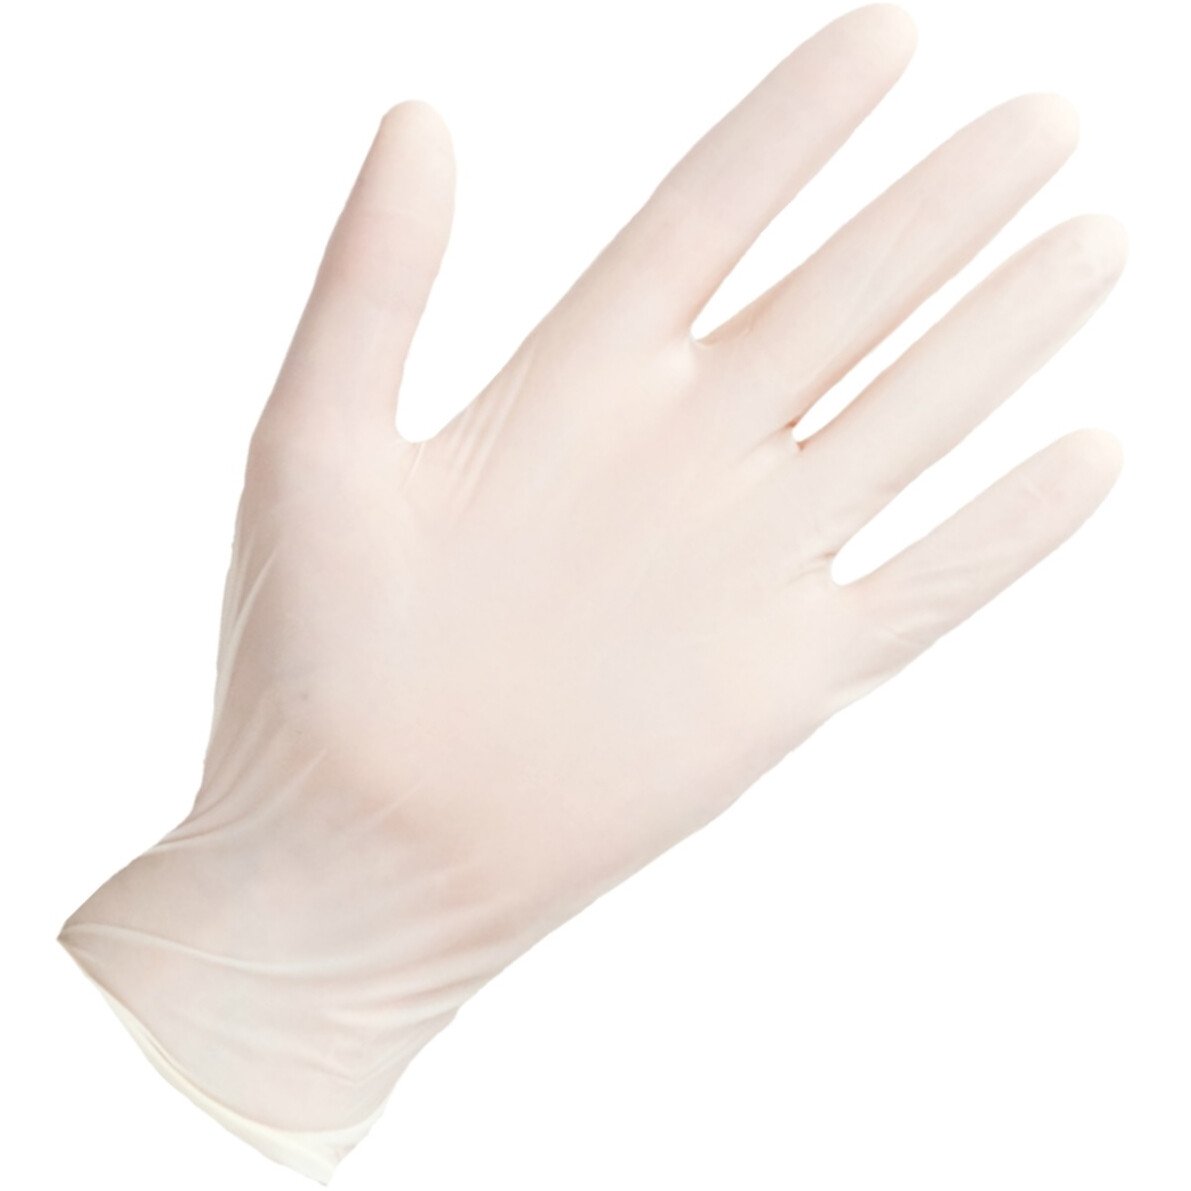 Lawson-HIS GLL460 Clear Latex Powdered Disposable Glove Large (Pack of 100)